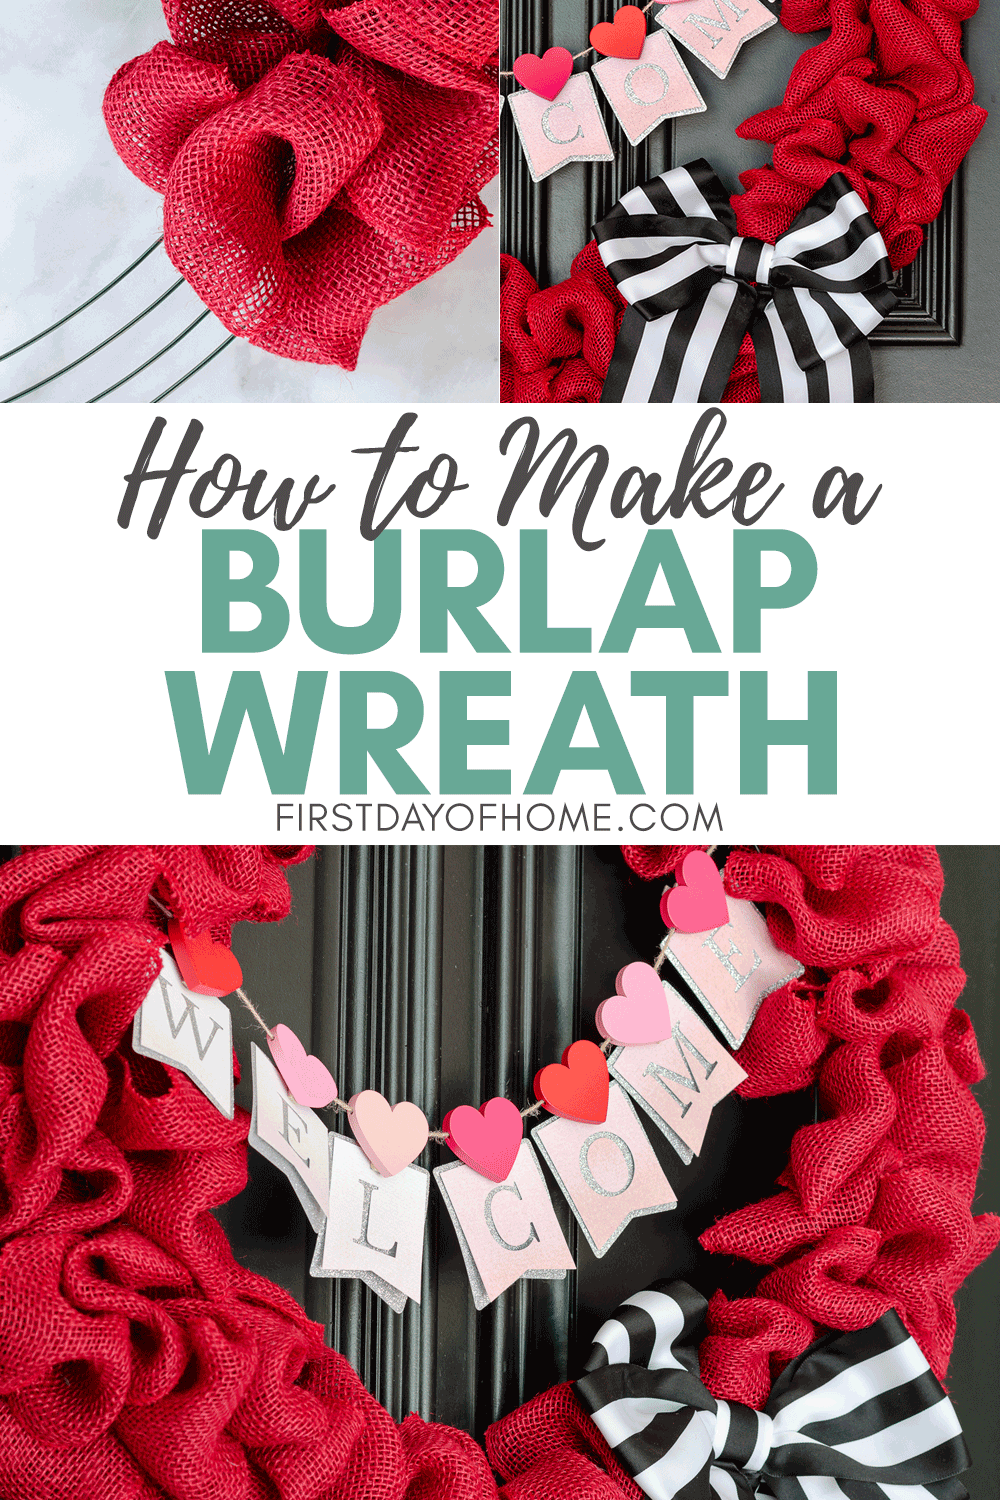 How to make a burlap wreath tutorial with video